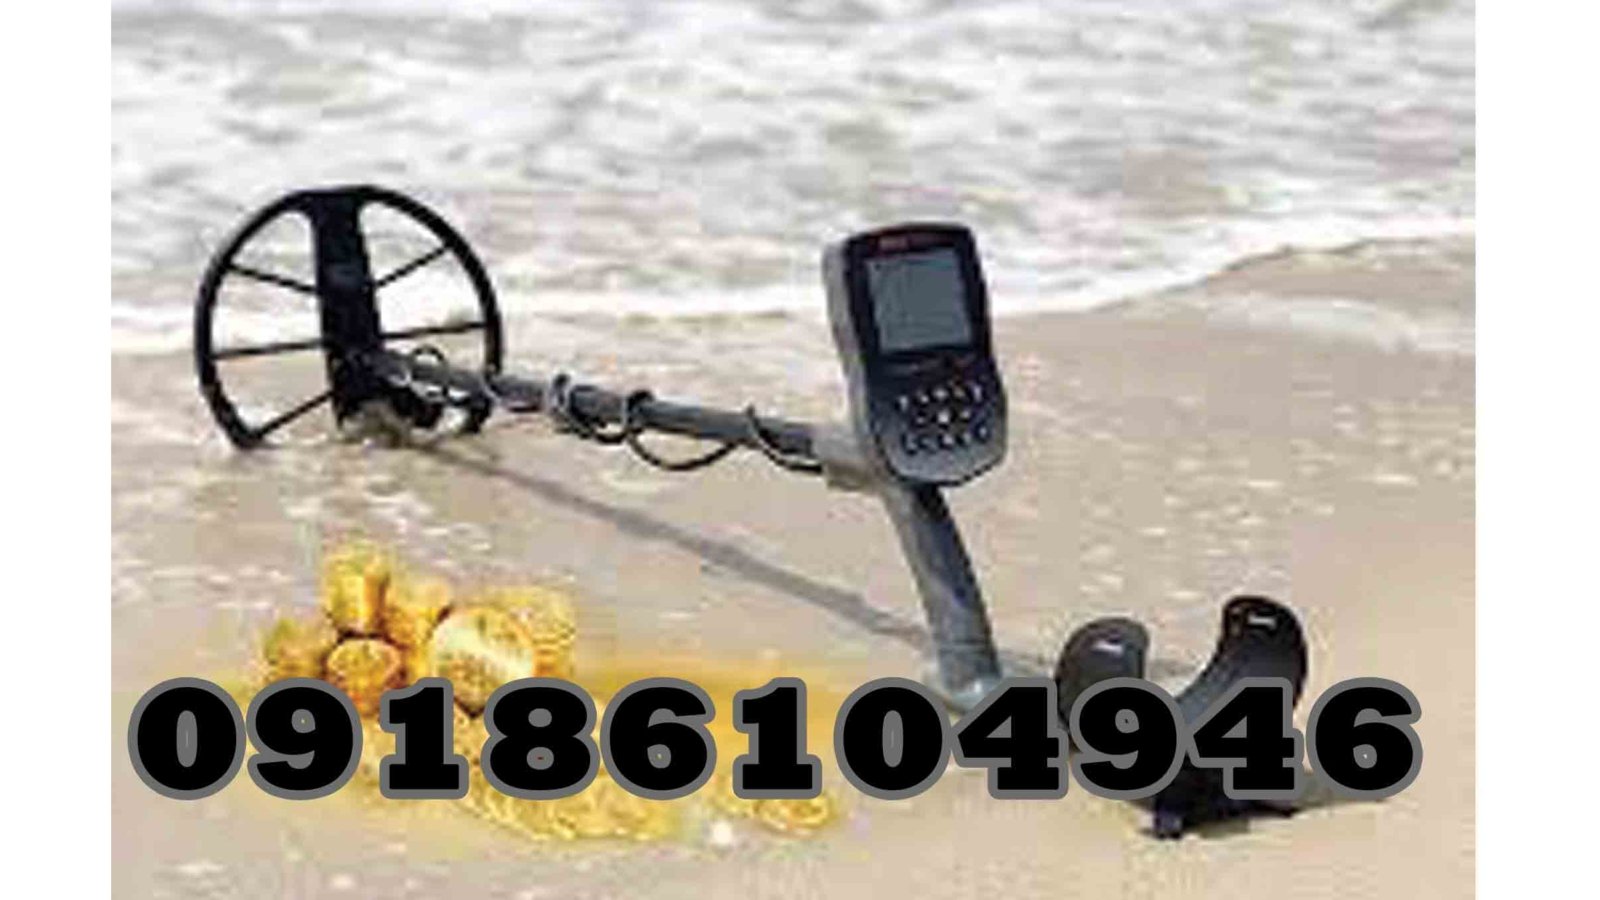 The price of a cheap and strong metal detector